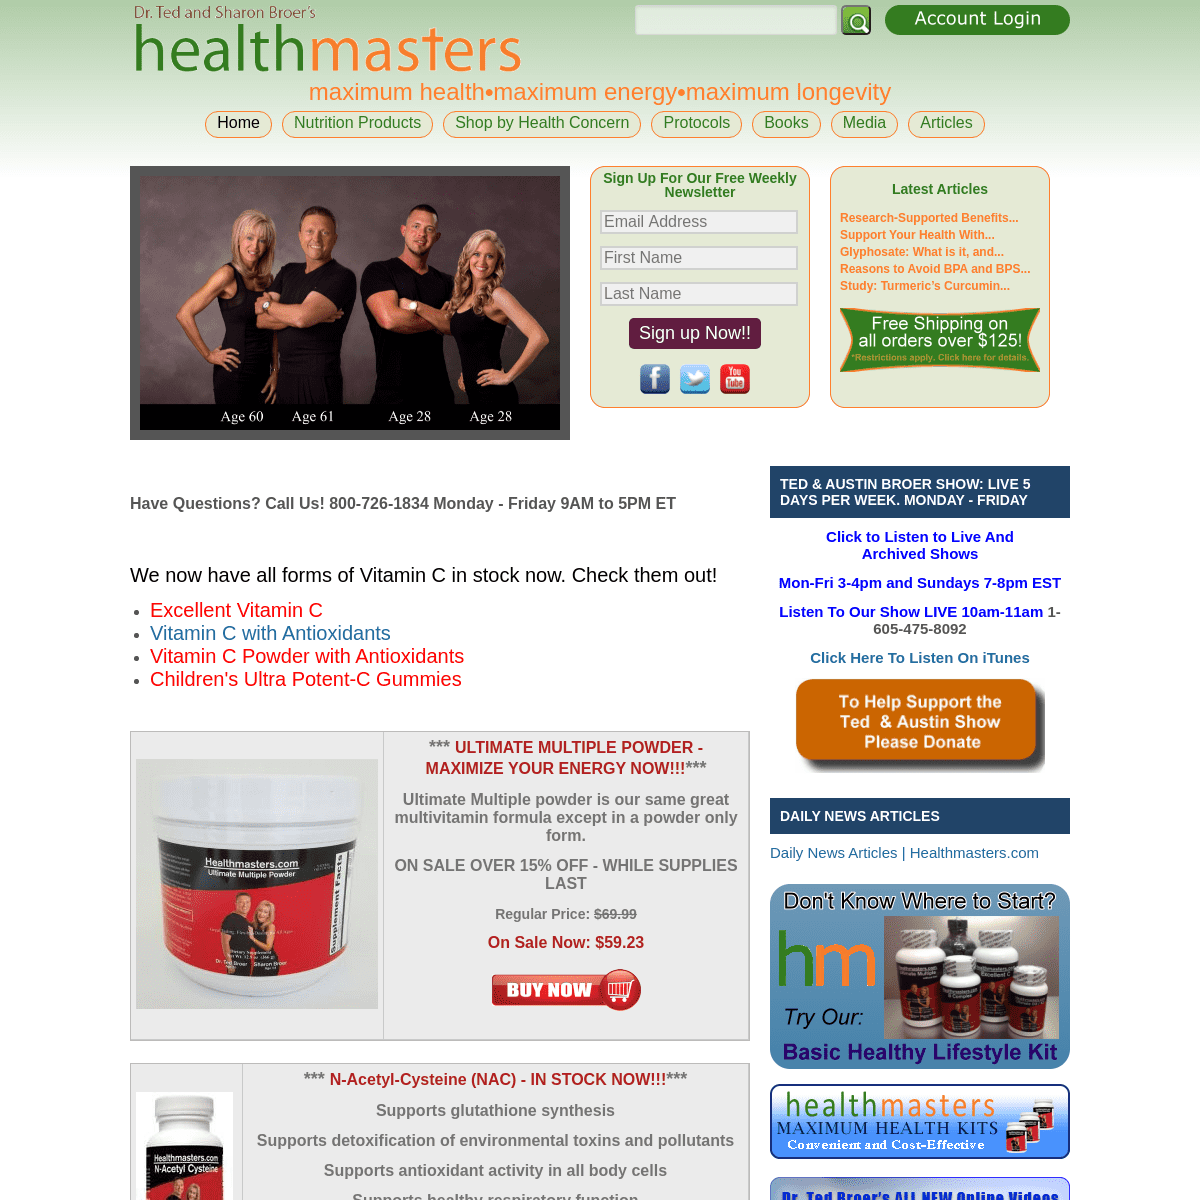 A complete backup of https://healthmasters.com